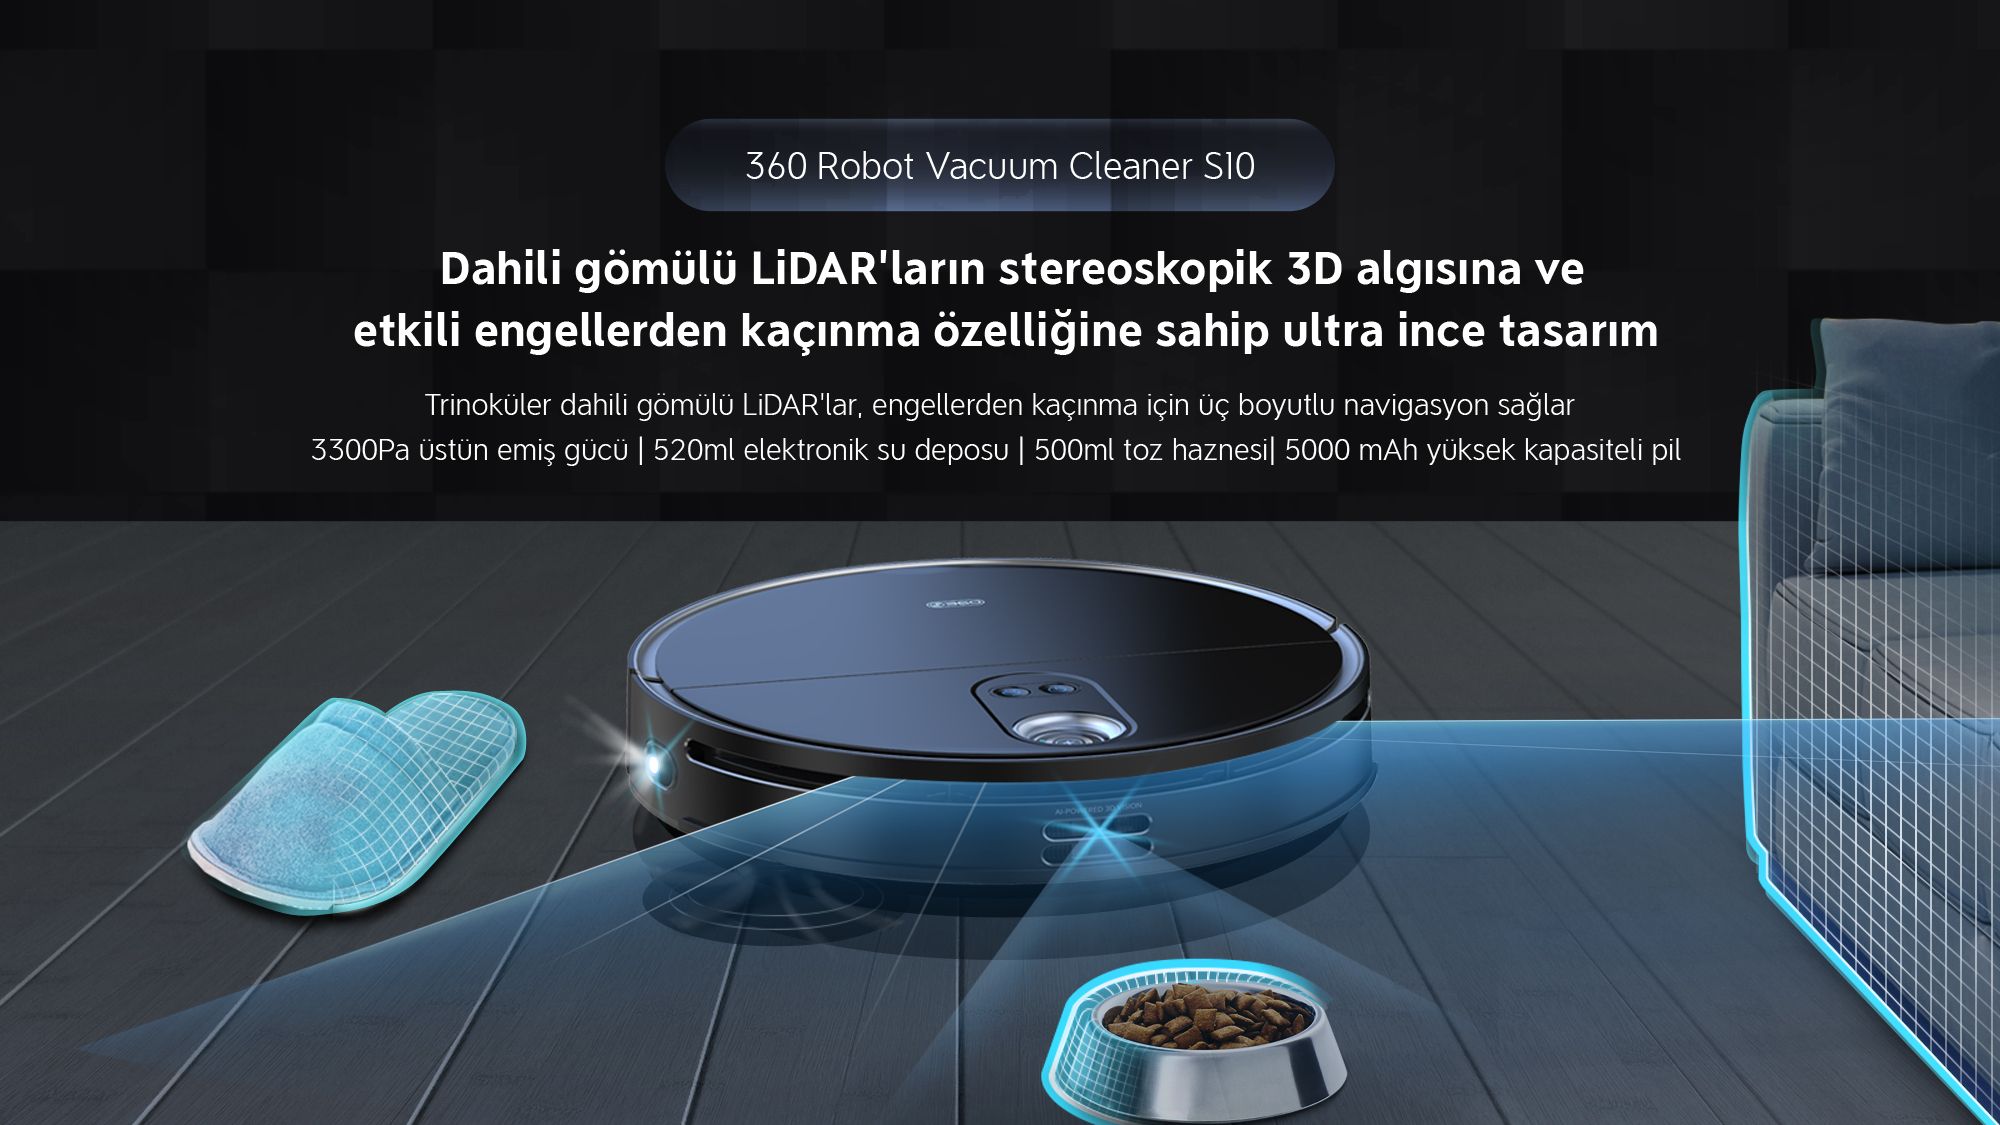 360 Robot Vacuum Cleaner s10 with Mop –